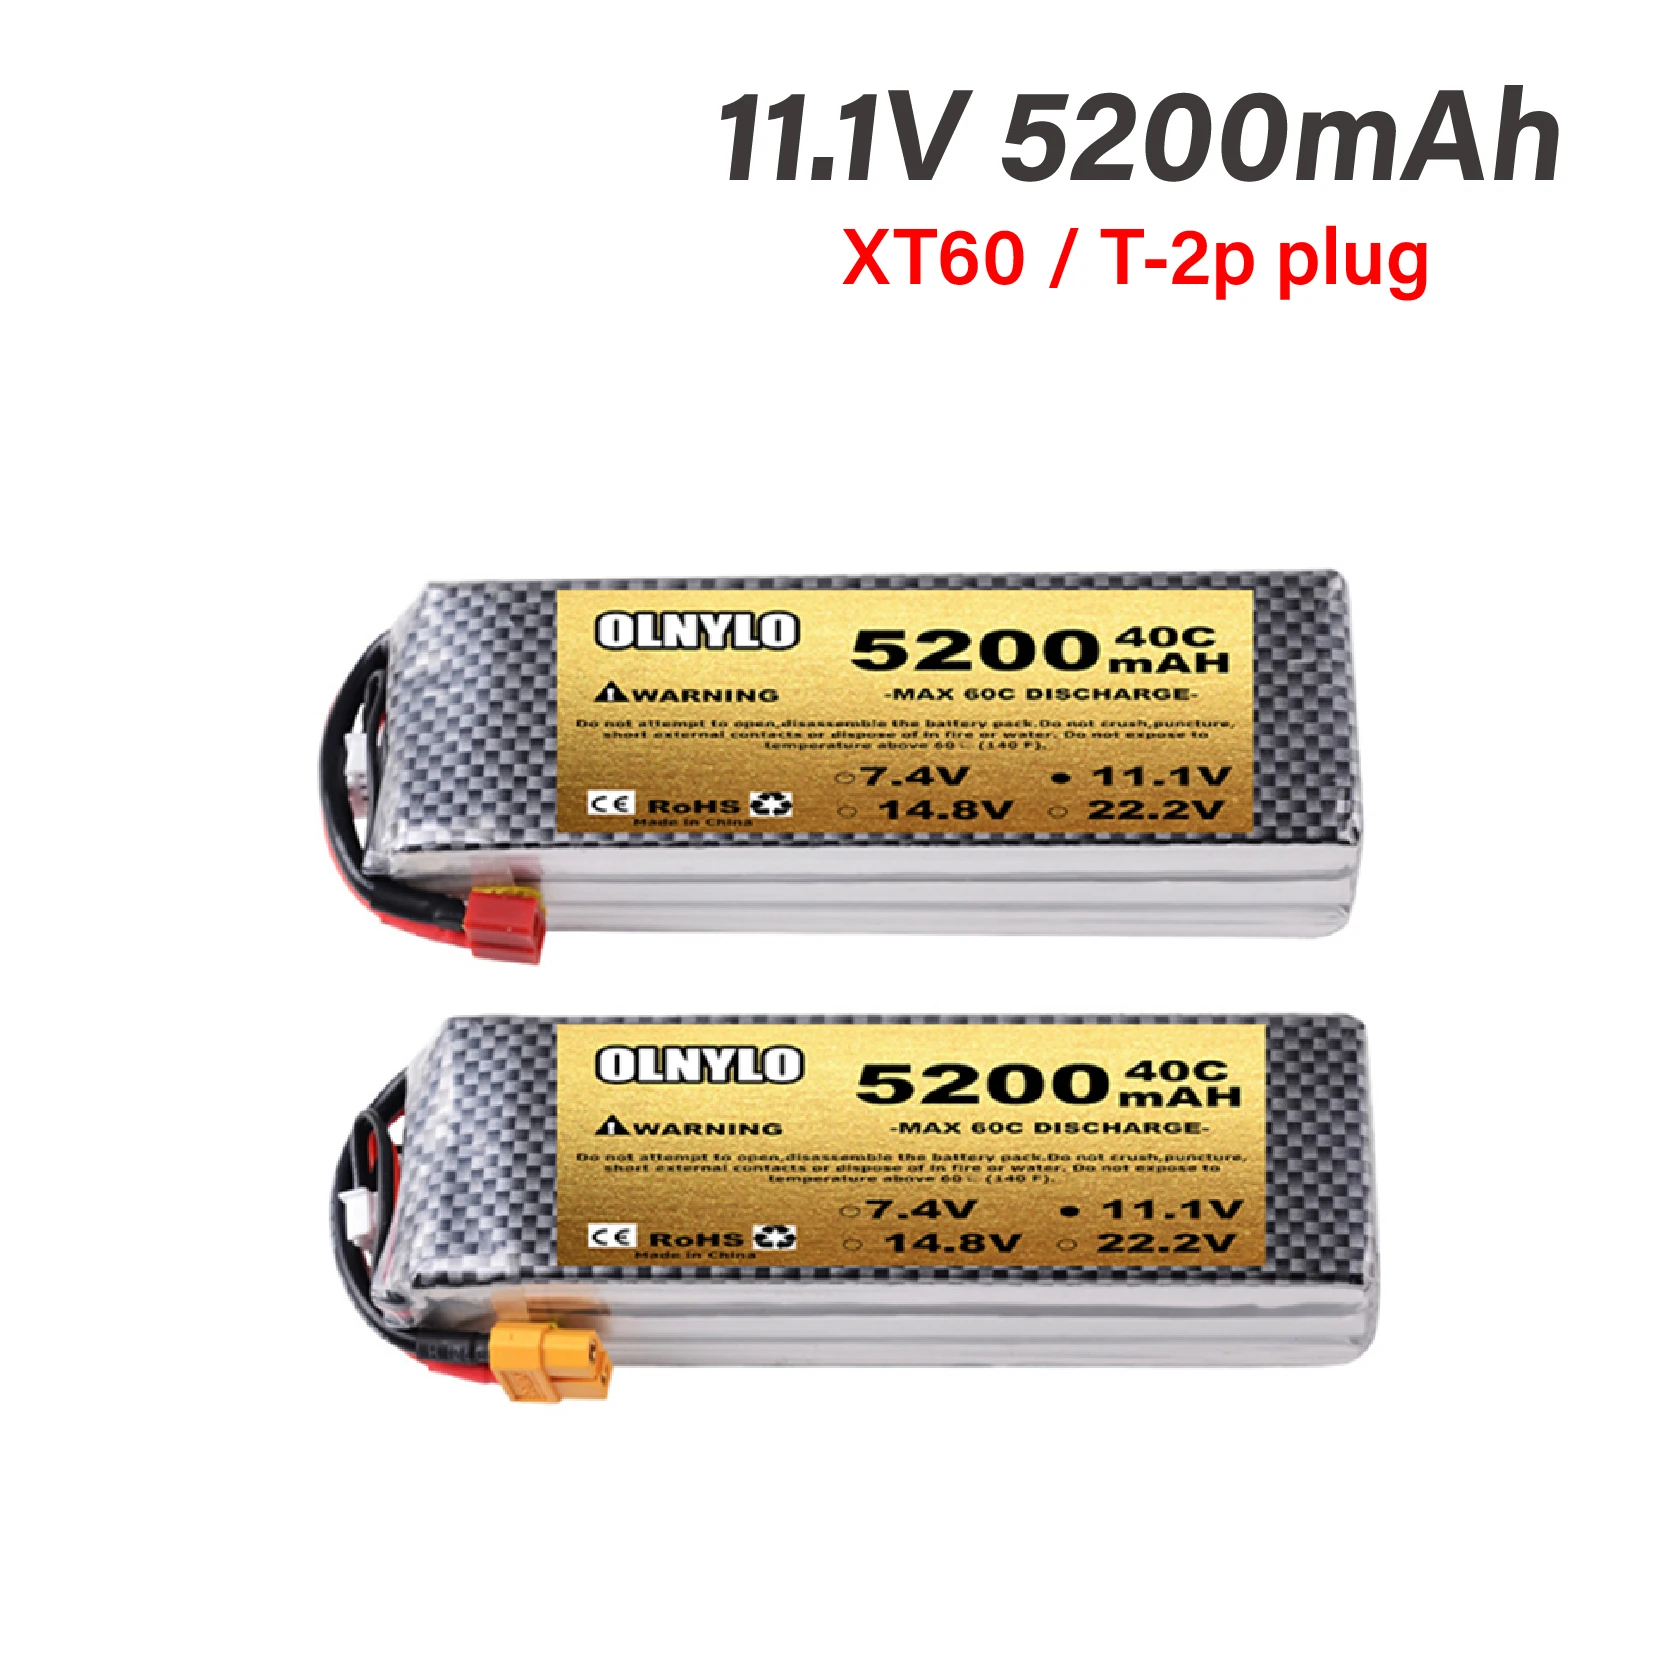 

11.1v 5200mah 3s 40C High magnification LiPo Battery With T XT60 Plug For RC Helicopter Aircraft Quadcopter Cars Airplane 3S